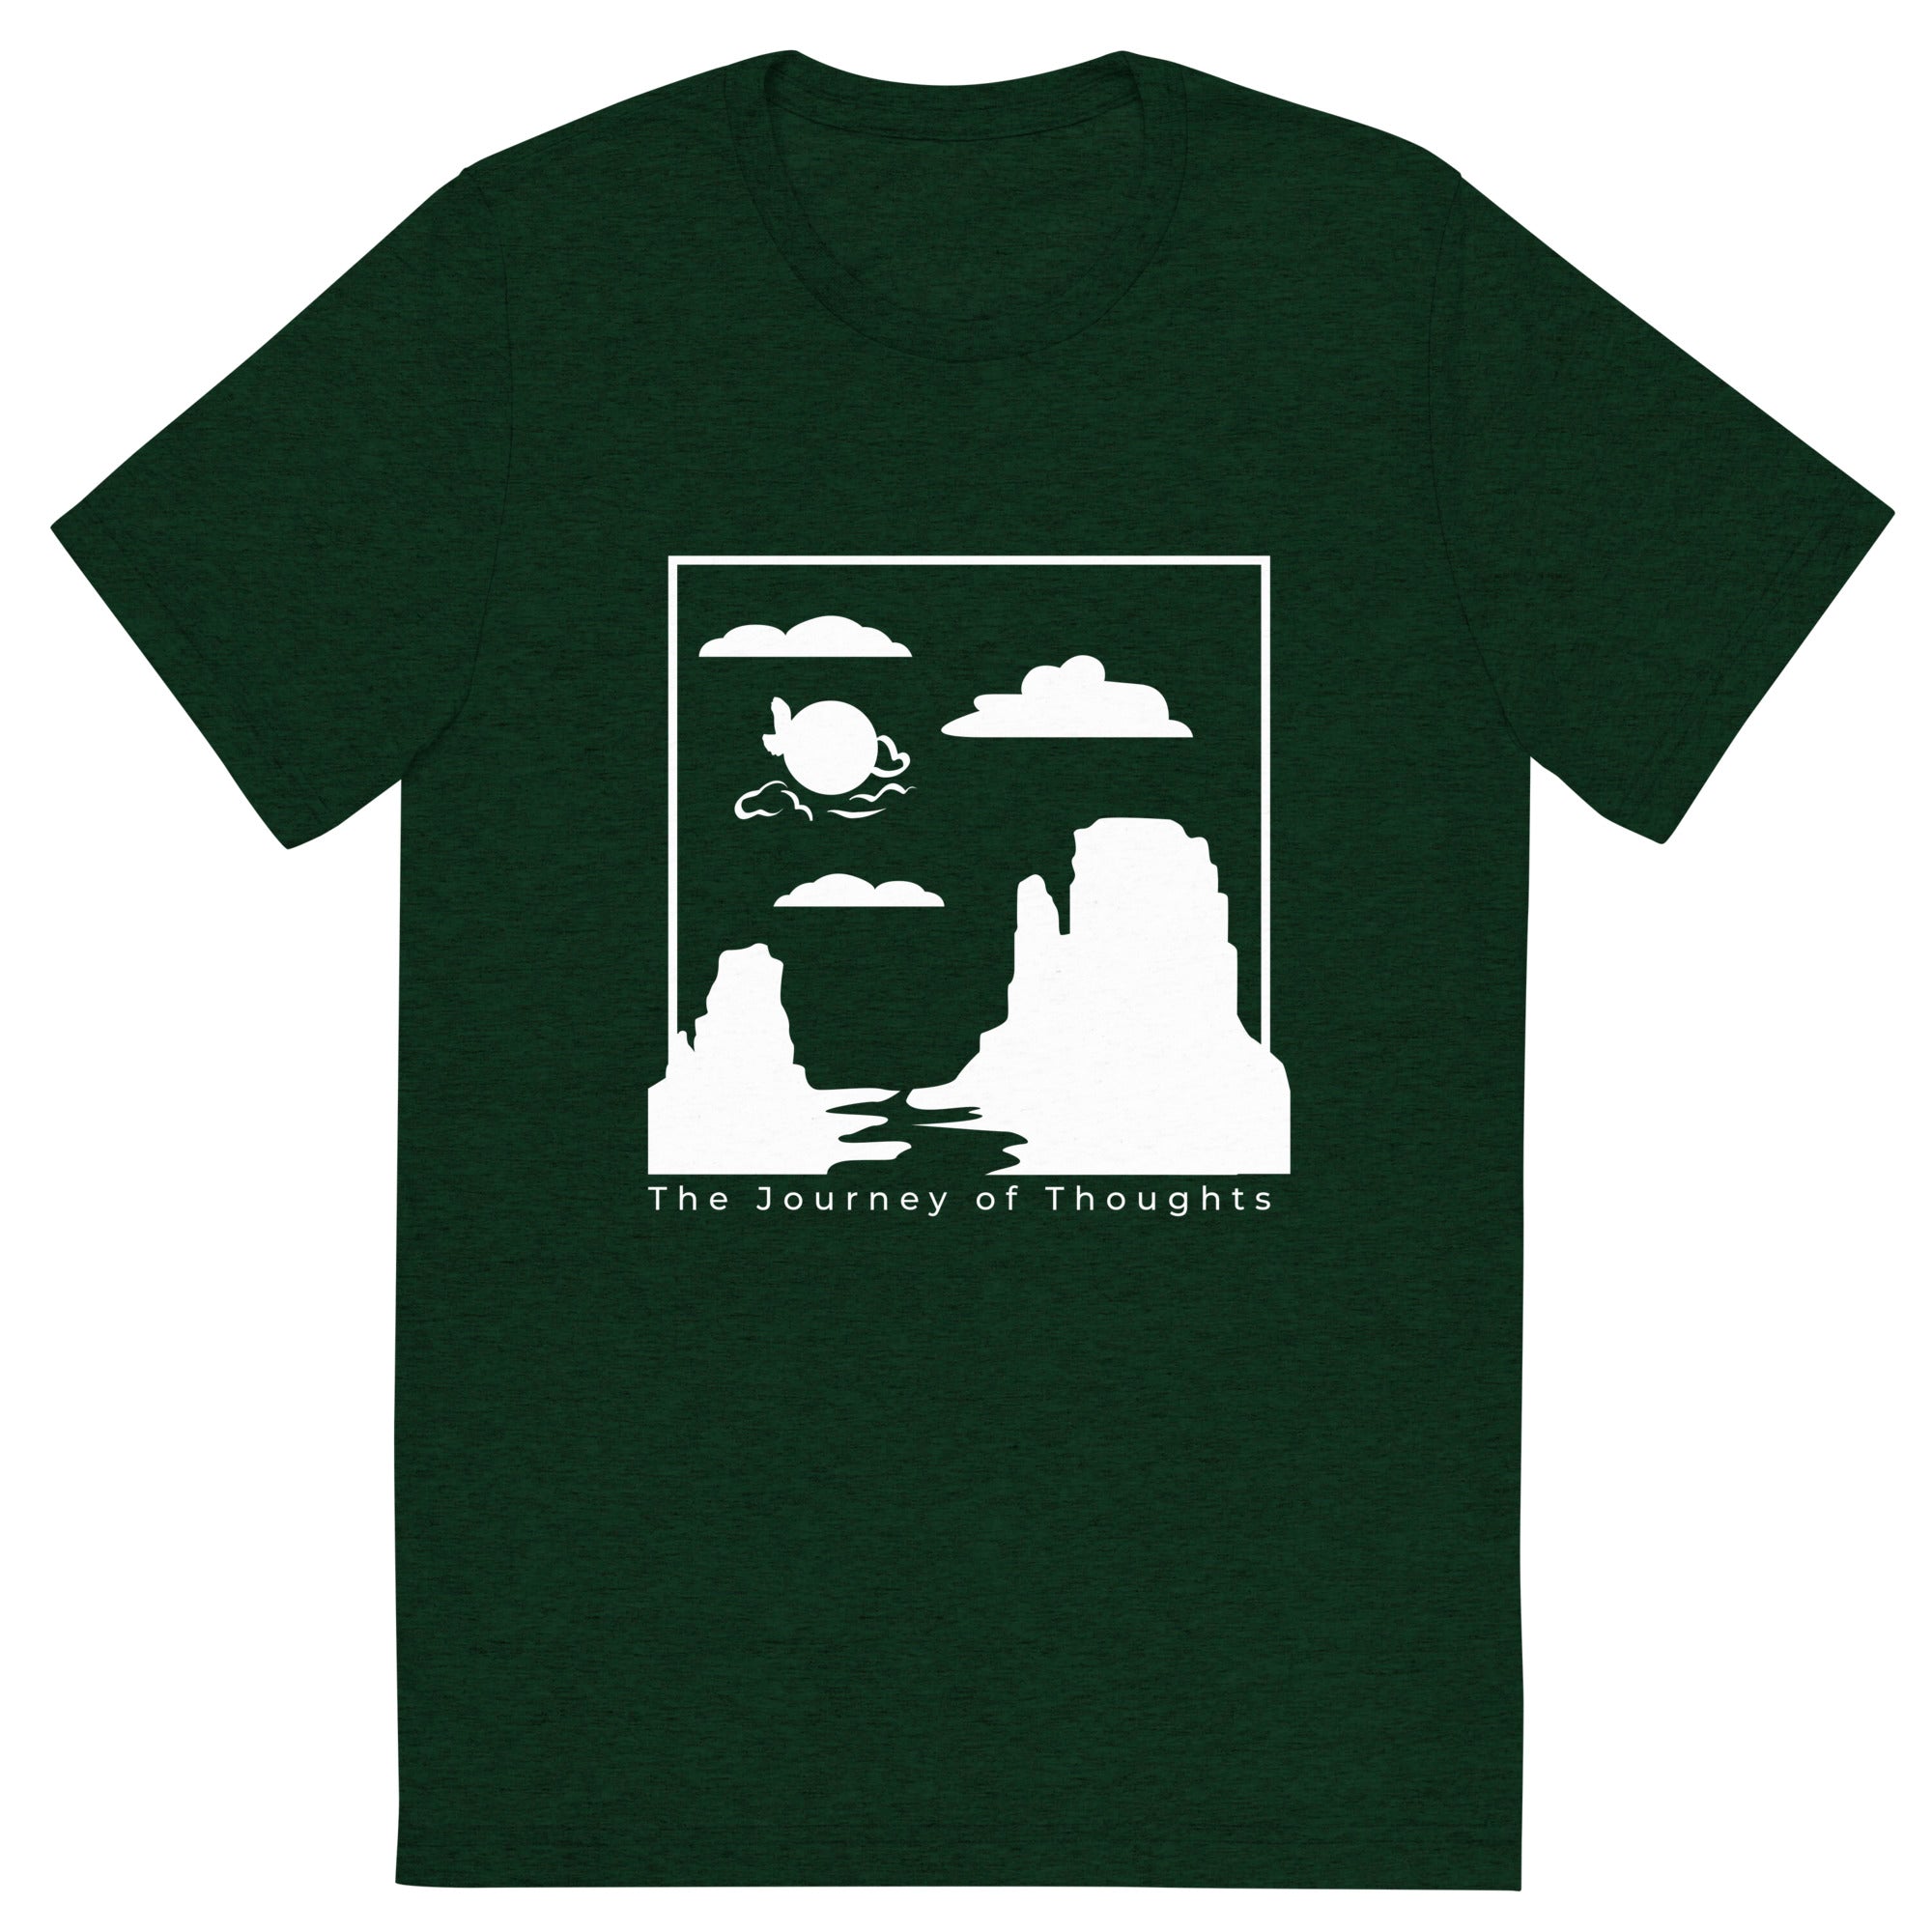 The journey of thoughts- a tale to ta tell collection short sleeve t-shirt